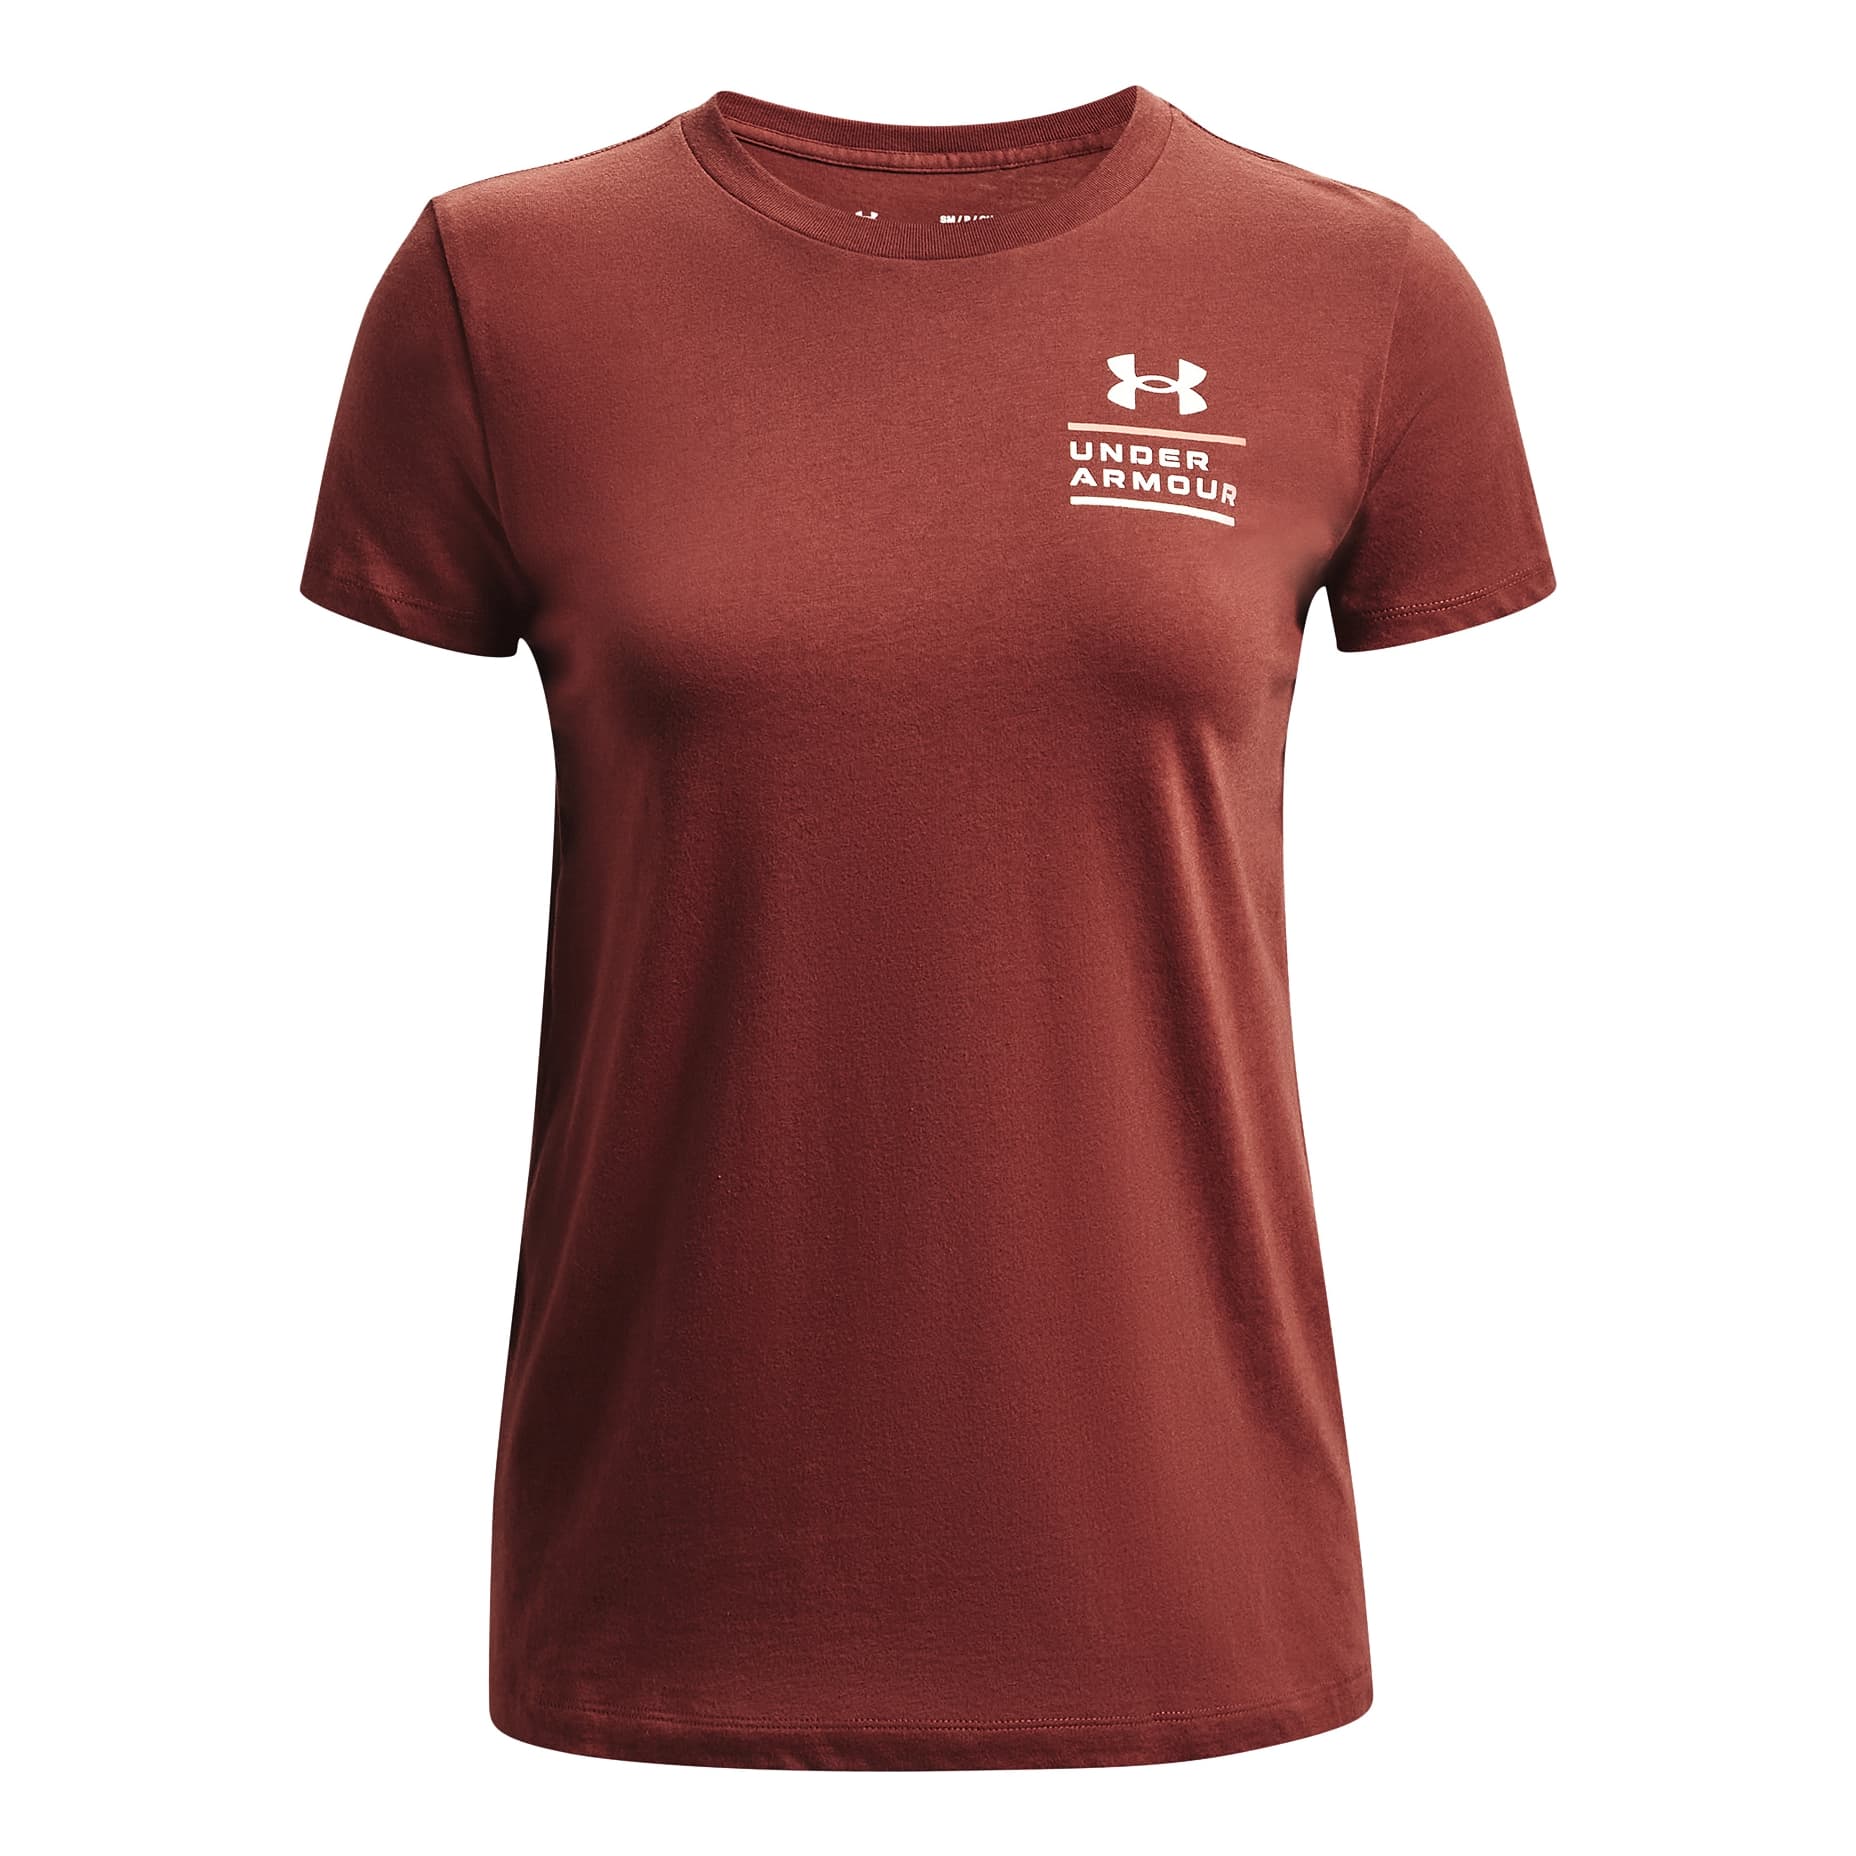 Under Armour® Women's Live Sportstyle Graphic Short-Sleeve T-Shirt